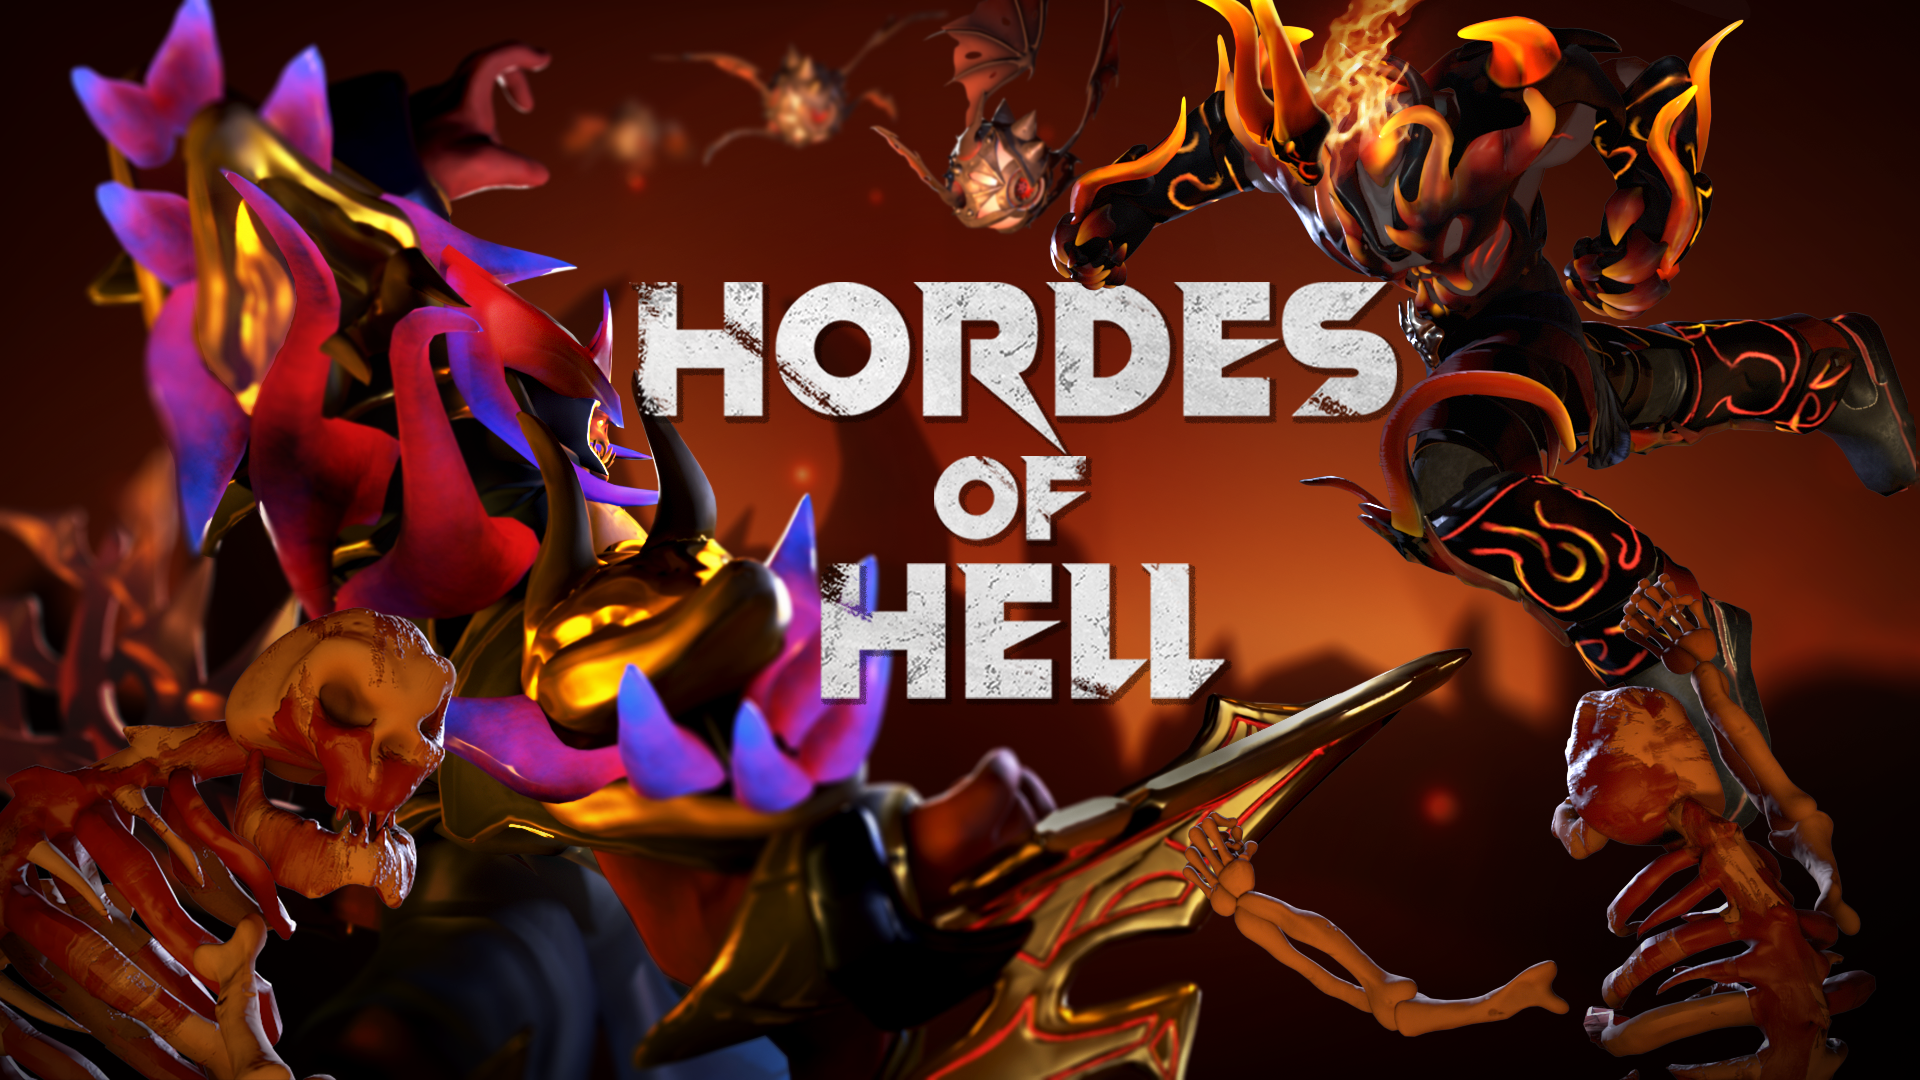 HORDES OF HELL